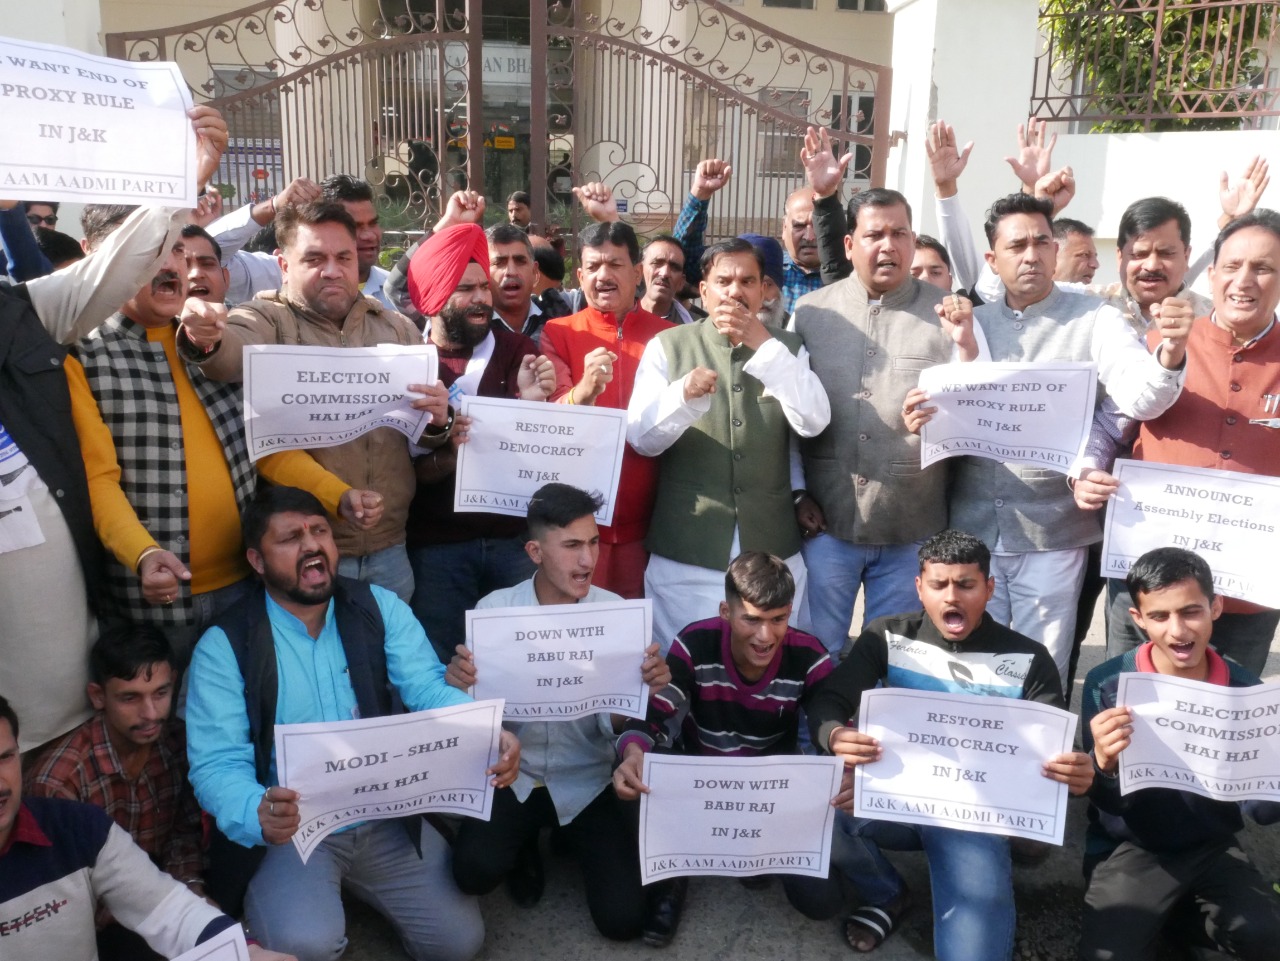 AAP protest delay in holding assembly polls in J&K